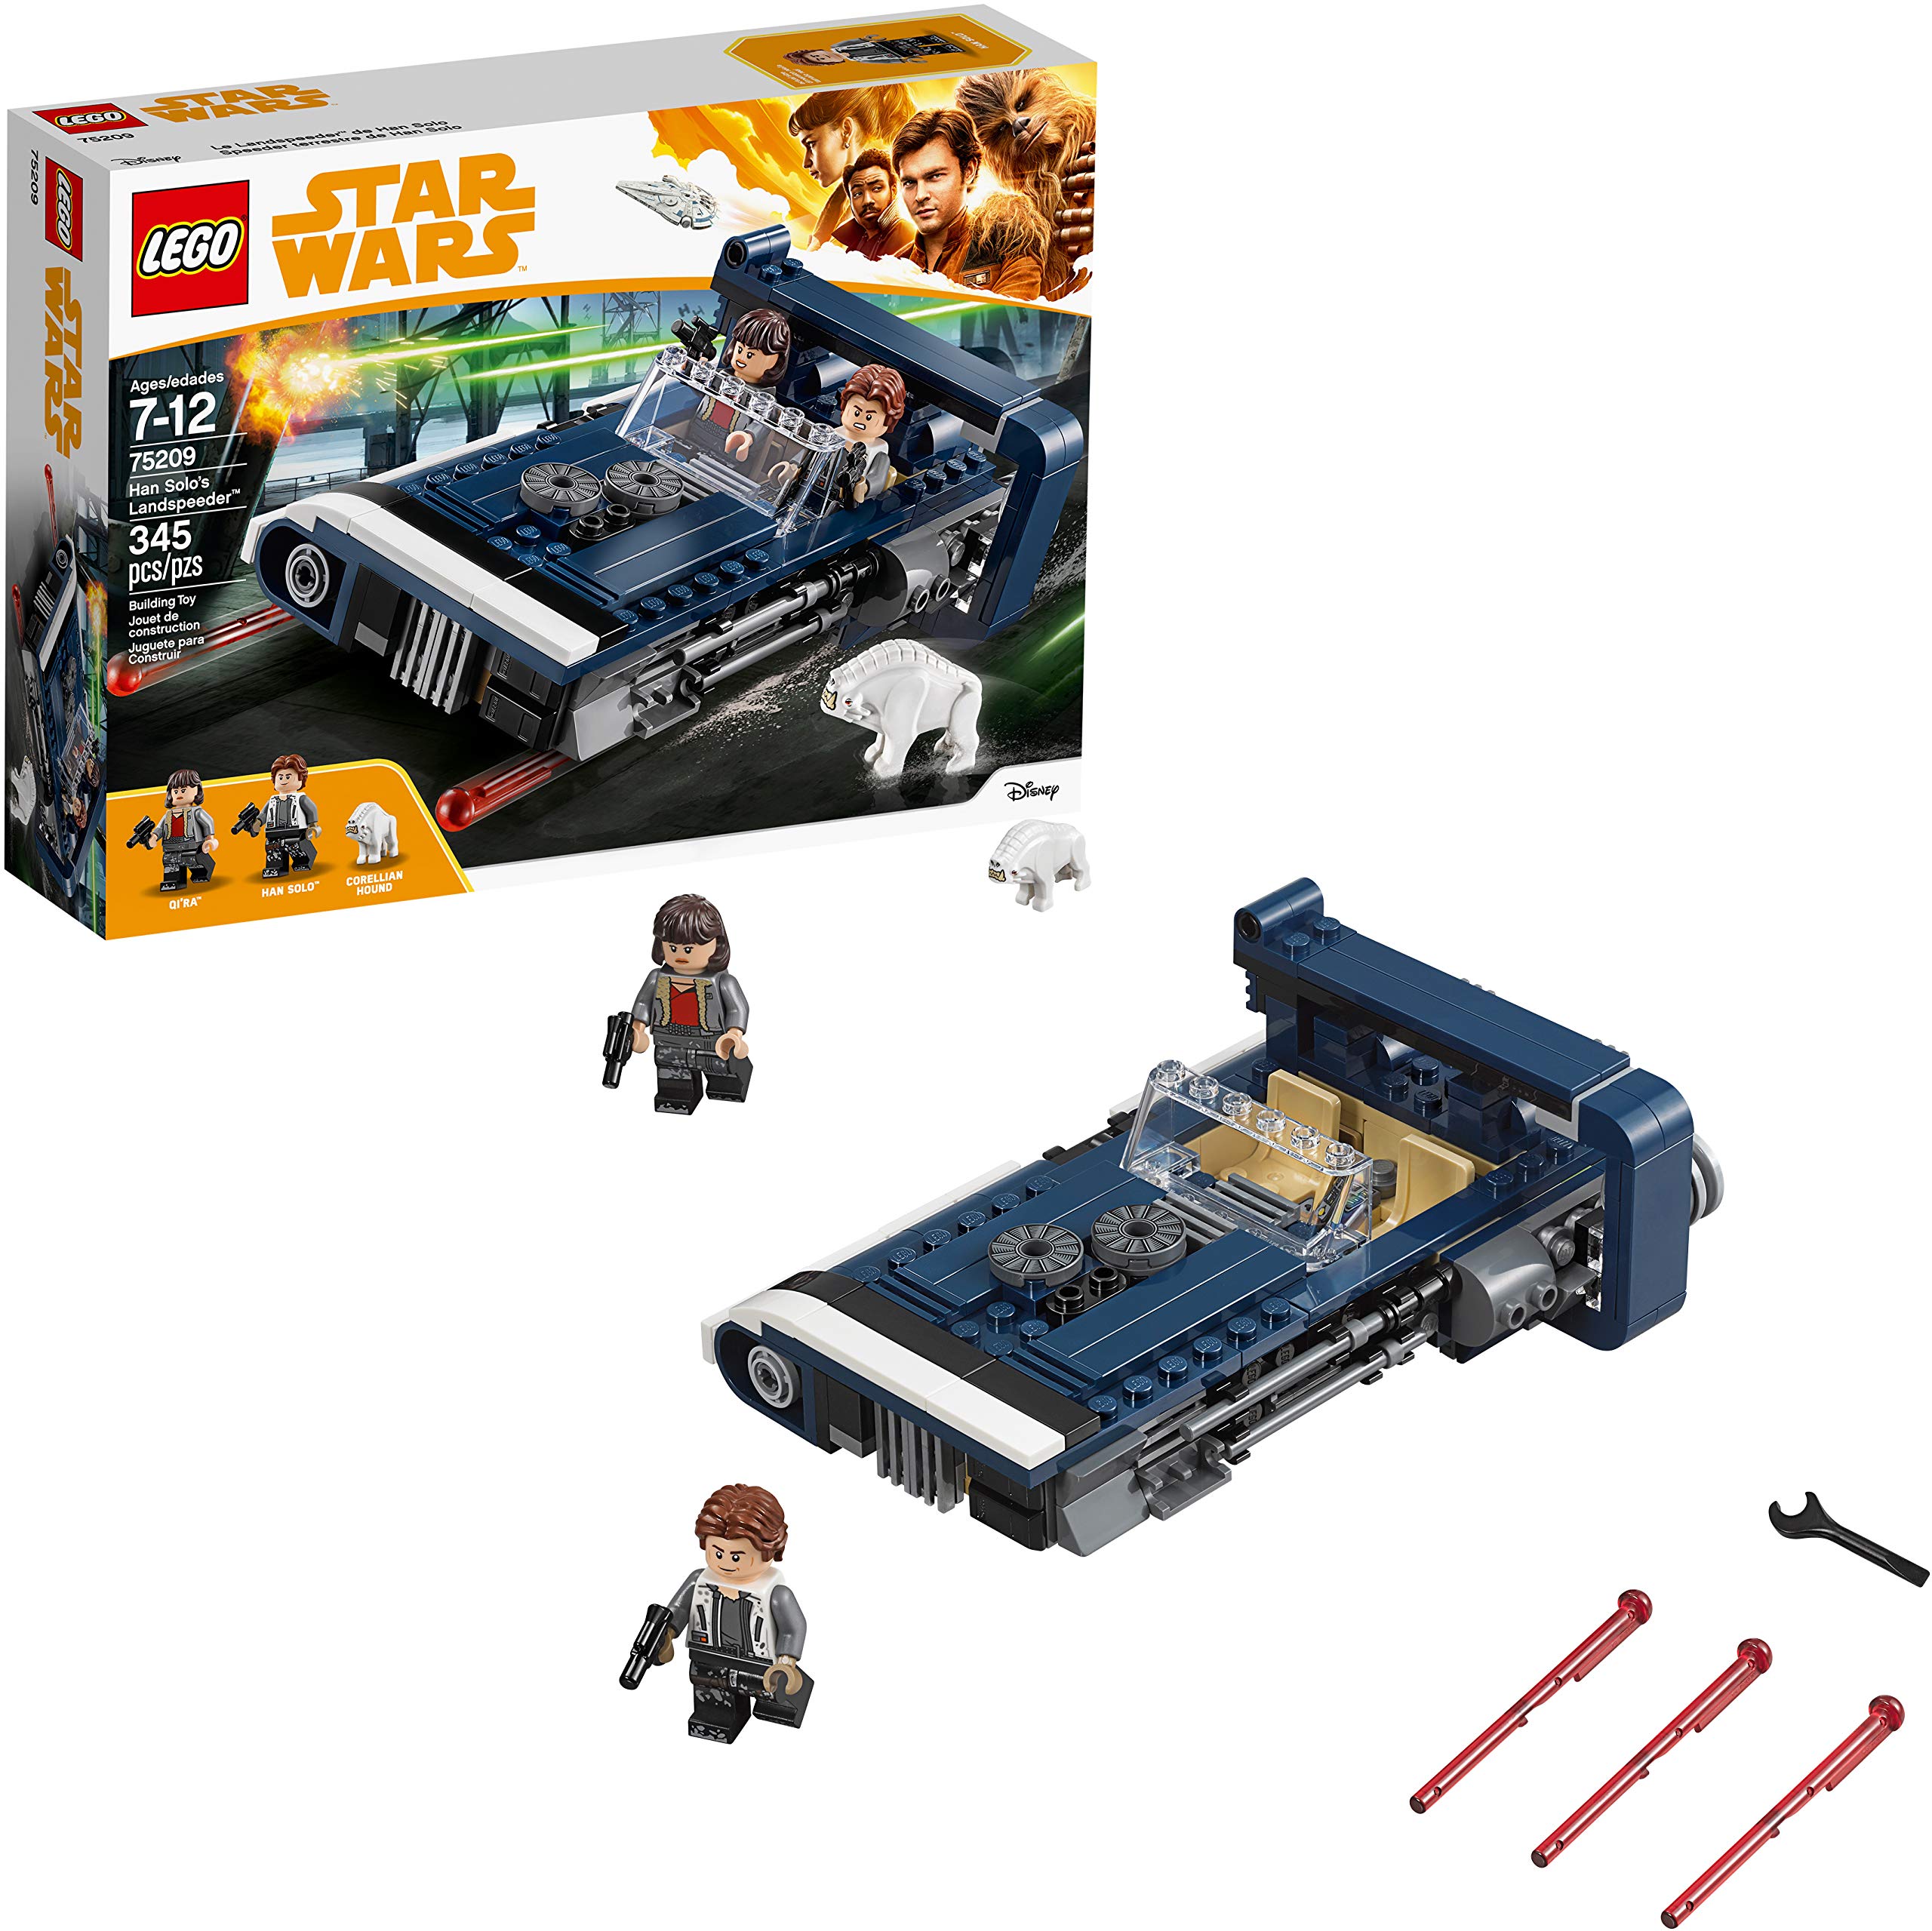 Book Cover LEGO Star Wars Solo: A Star Wars Story Han Solo’s Landspeeder 75209 Building Kit (345 Piece) (Discontinued by Manufacturer)